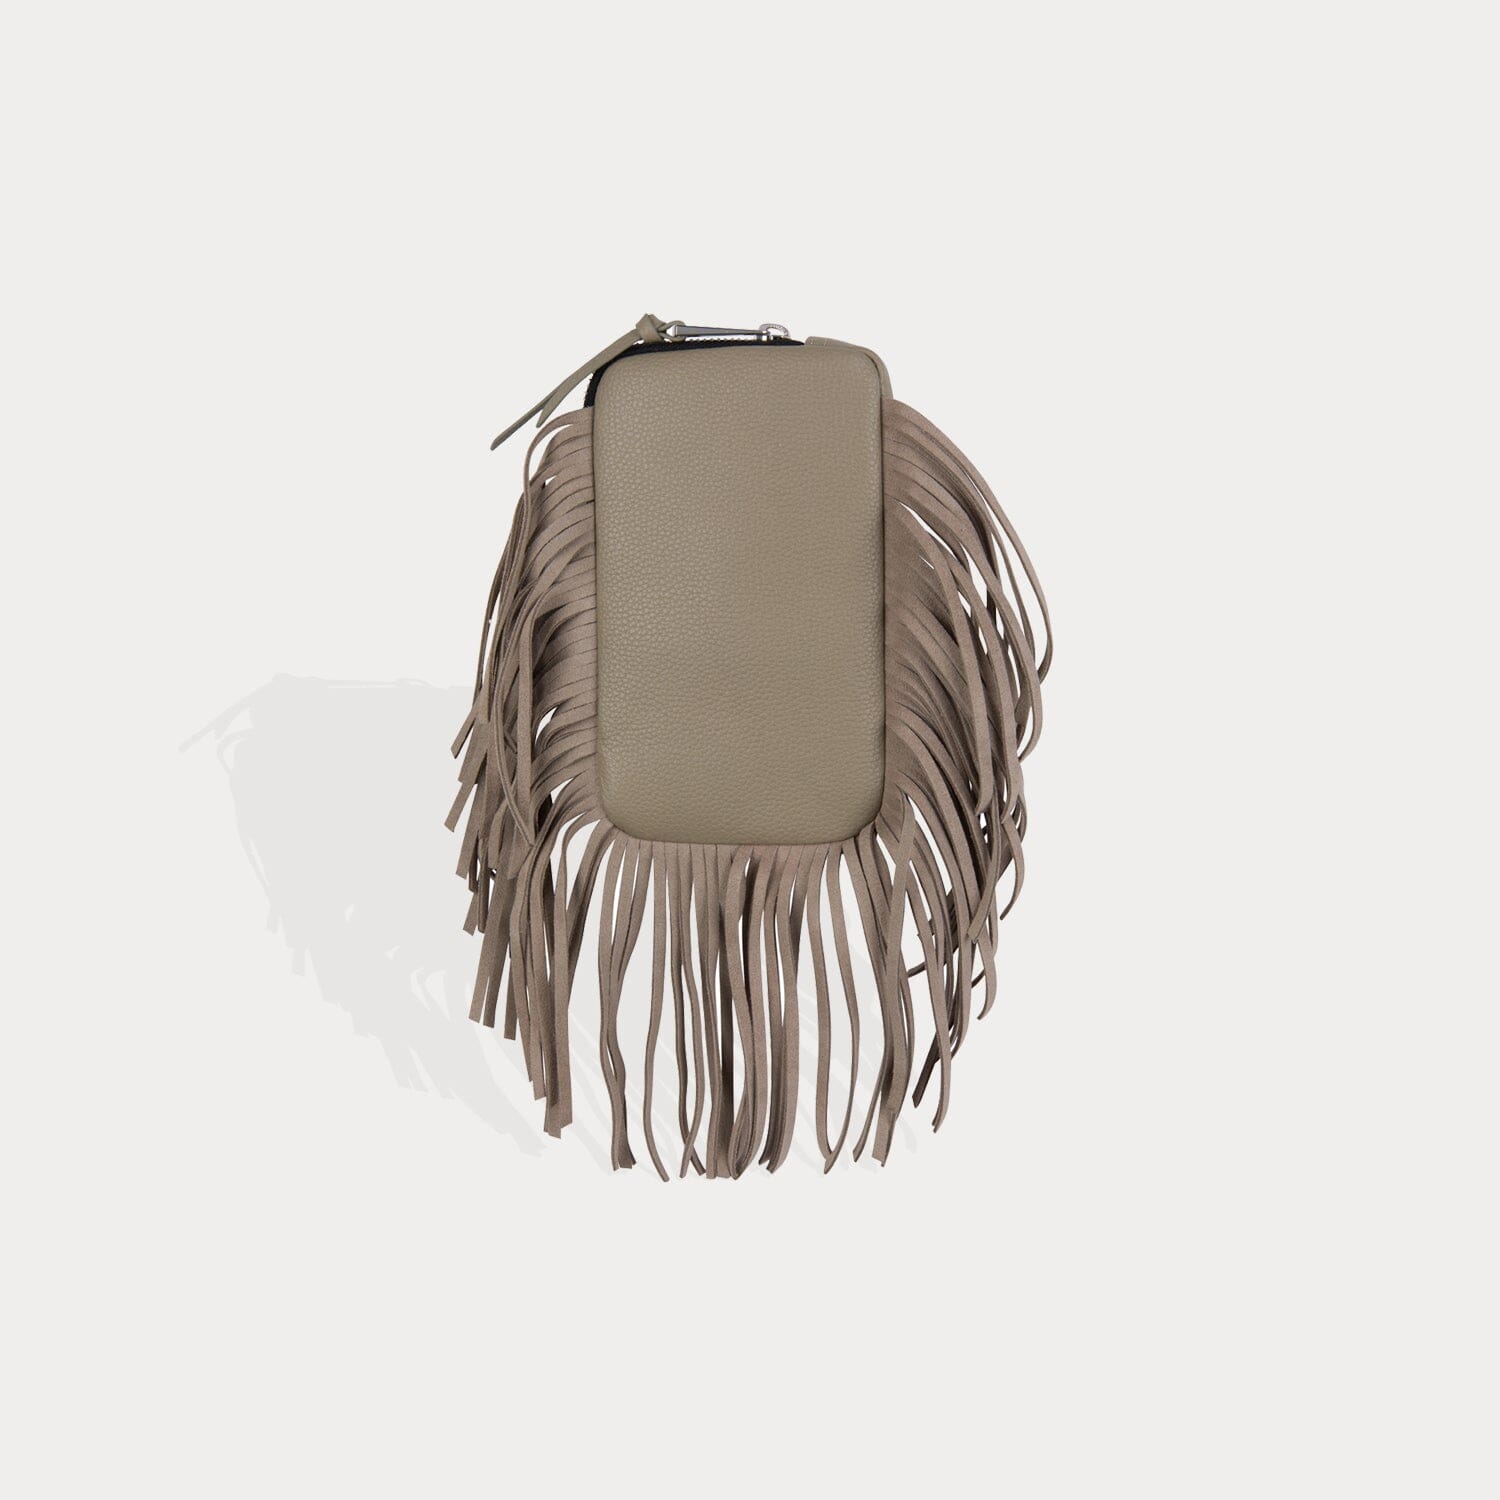 Fringe Expanded Pouch in Greige/Silver | Genuine Leather | Bandolier Style